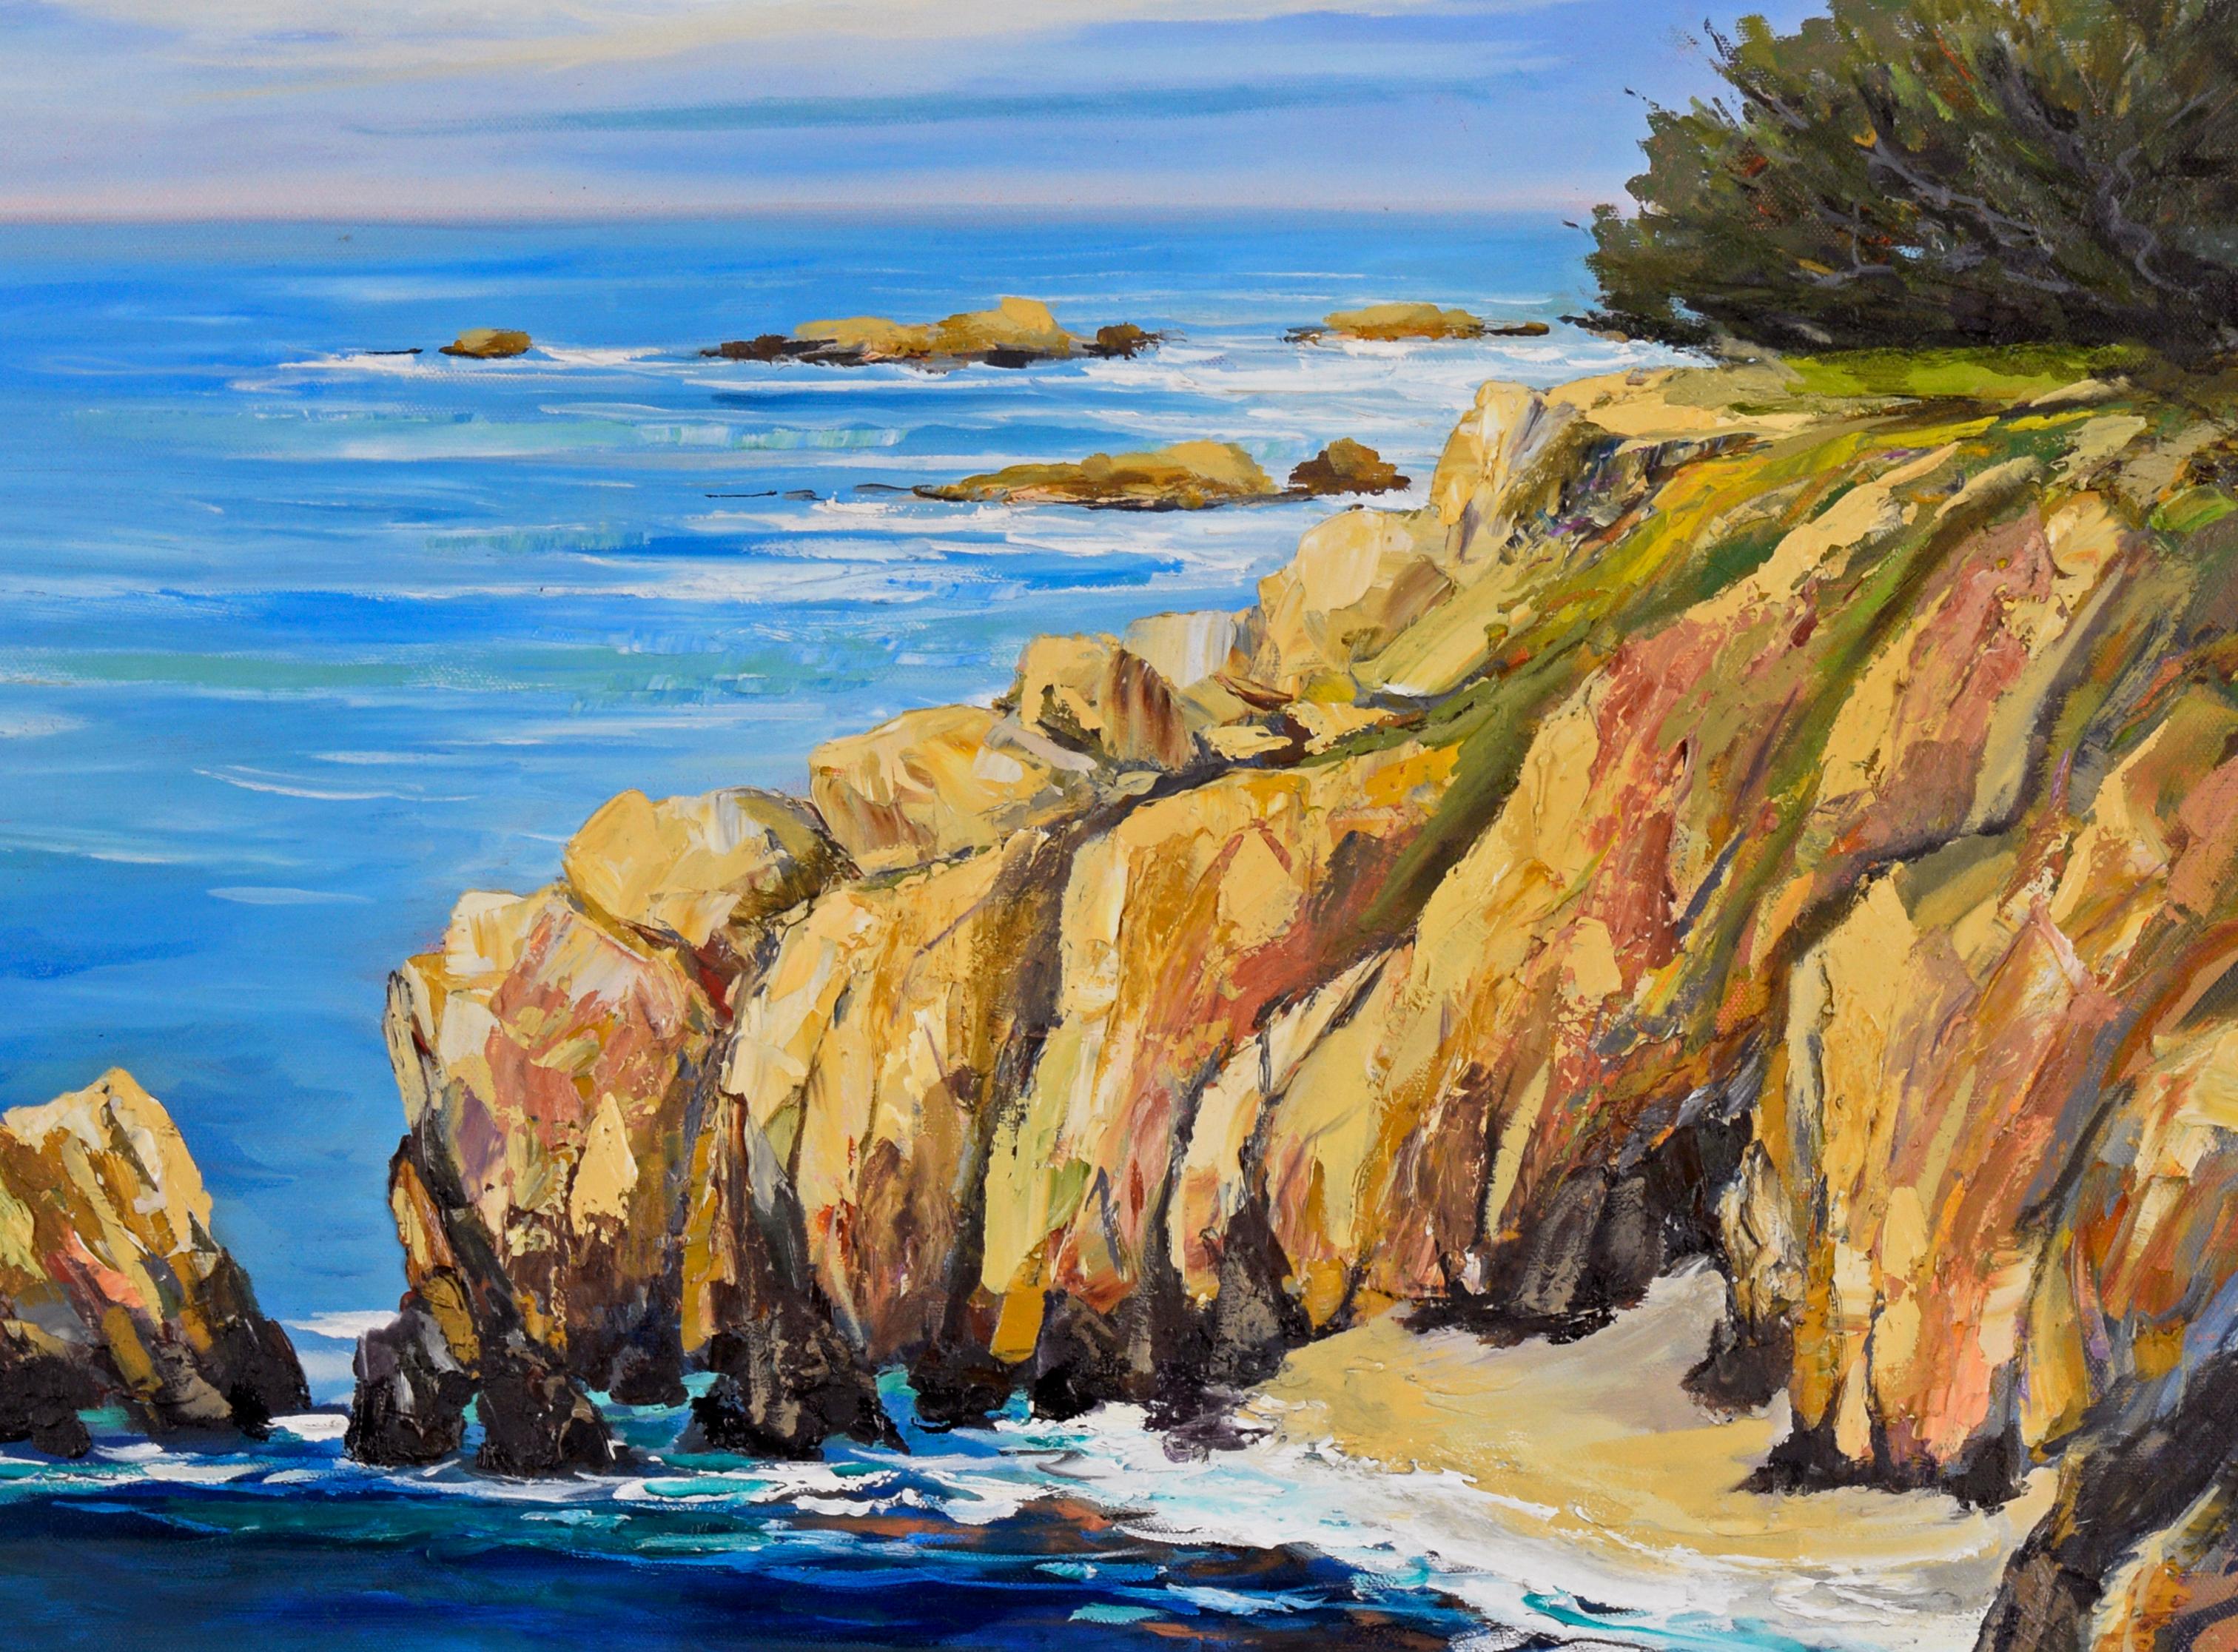 Hurricane Point, Big Sur - Impasto and Pallett Knife Oil on Canvas - American Impressionist Painting by Kathleen Murray